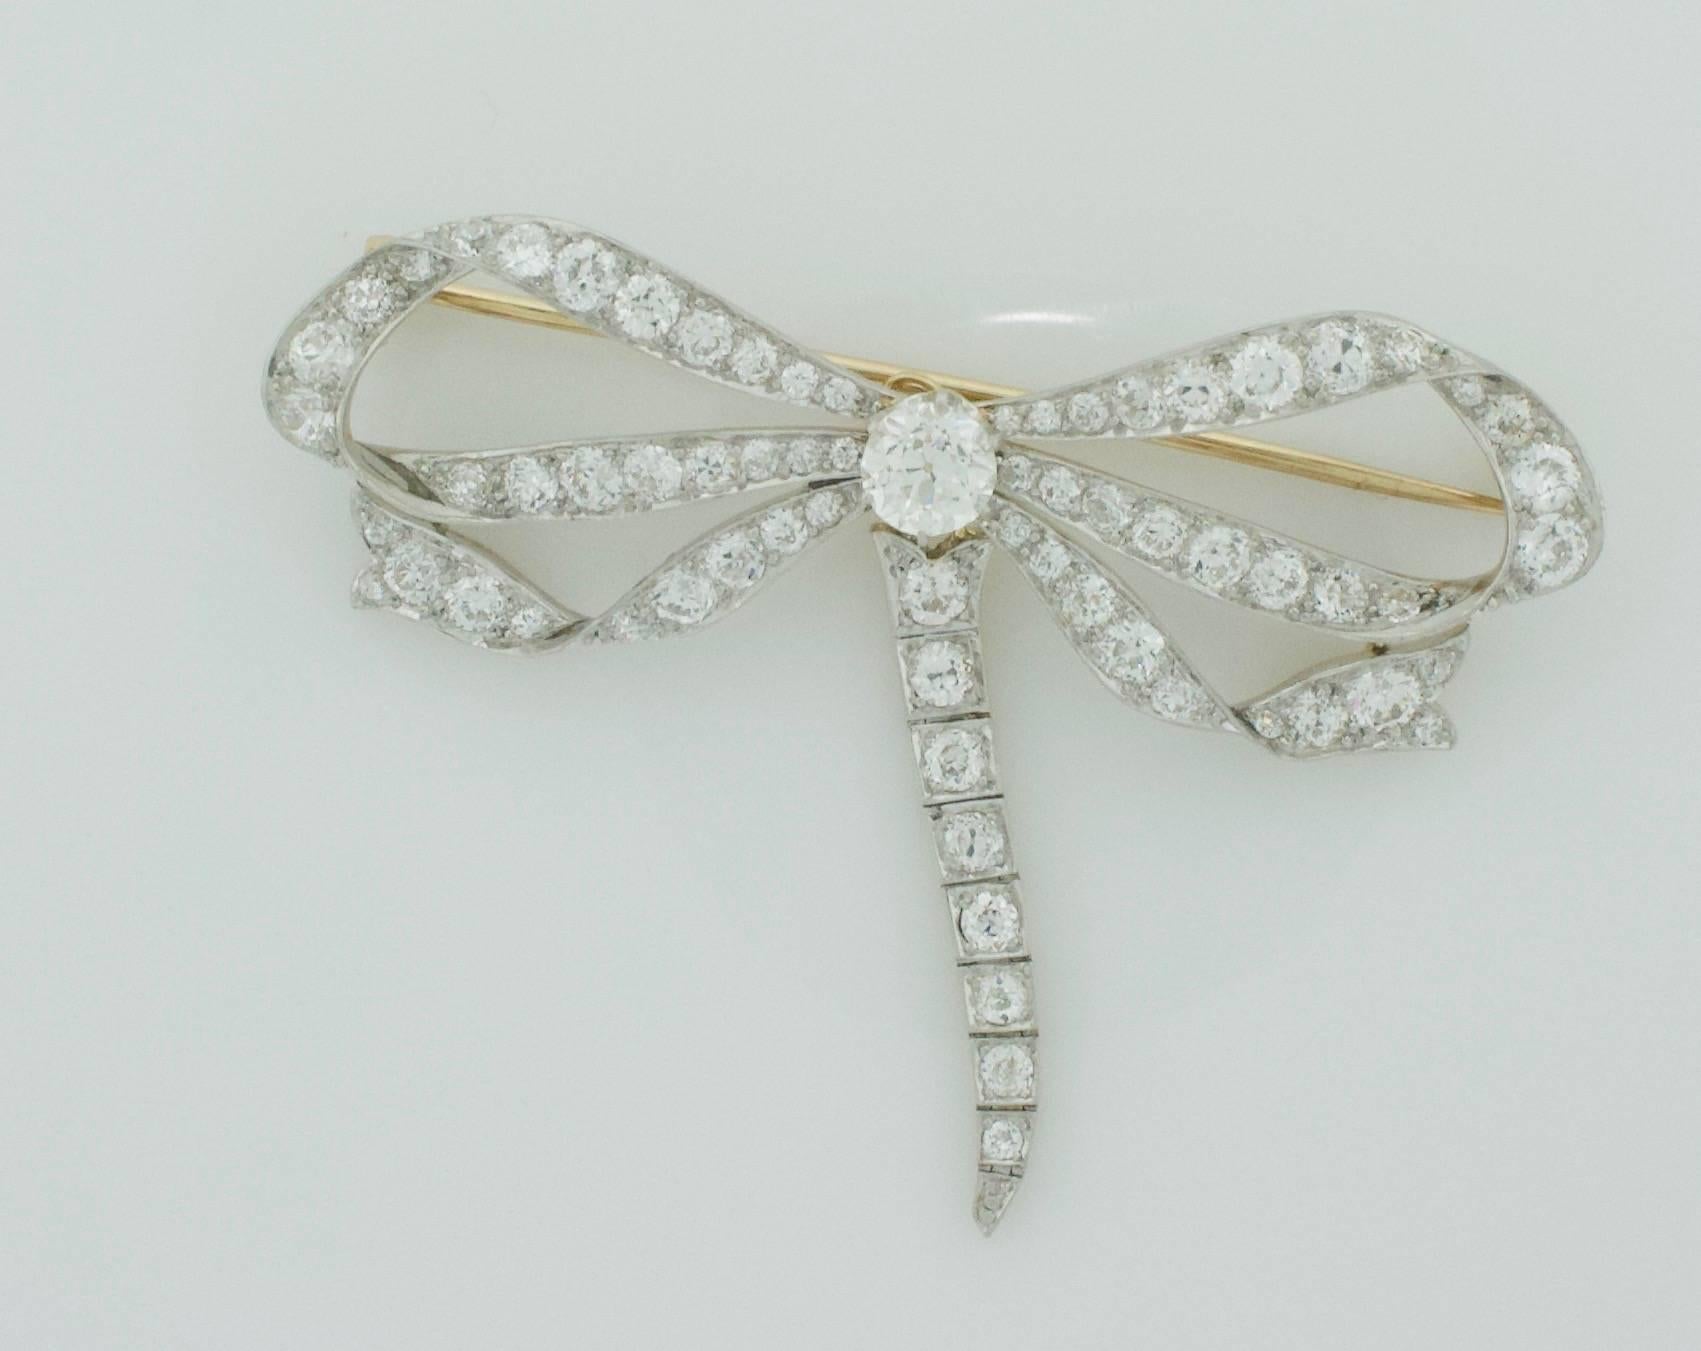 Platinum on 18k Yellow Gold Bow Brooch Circa 1910
Weighing in Just Shy of Seven carats
This Exceptional Bow Brooch has a Dangling (Removable Attachment)  Which Gives Th Wearer Two Distinct Looks